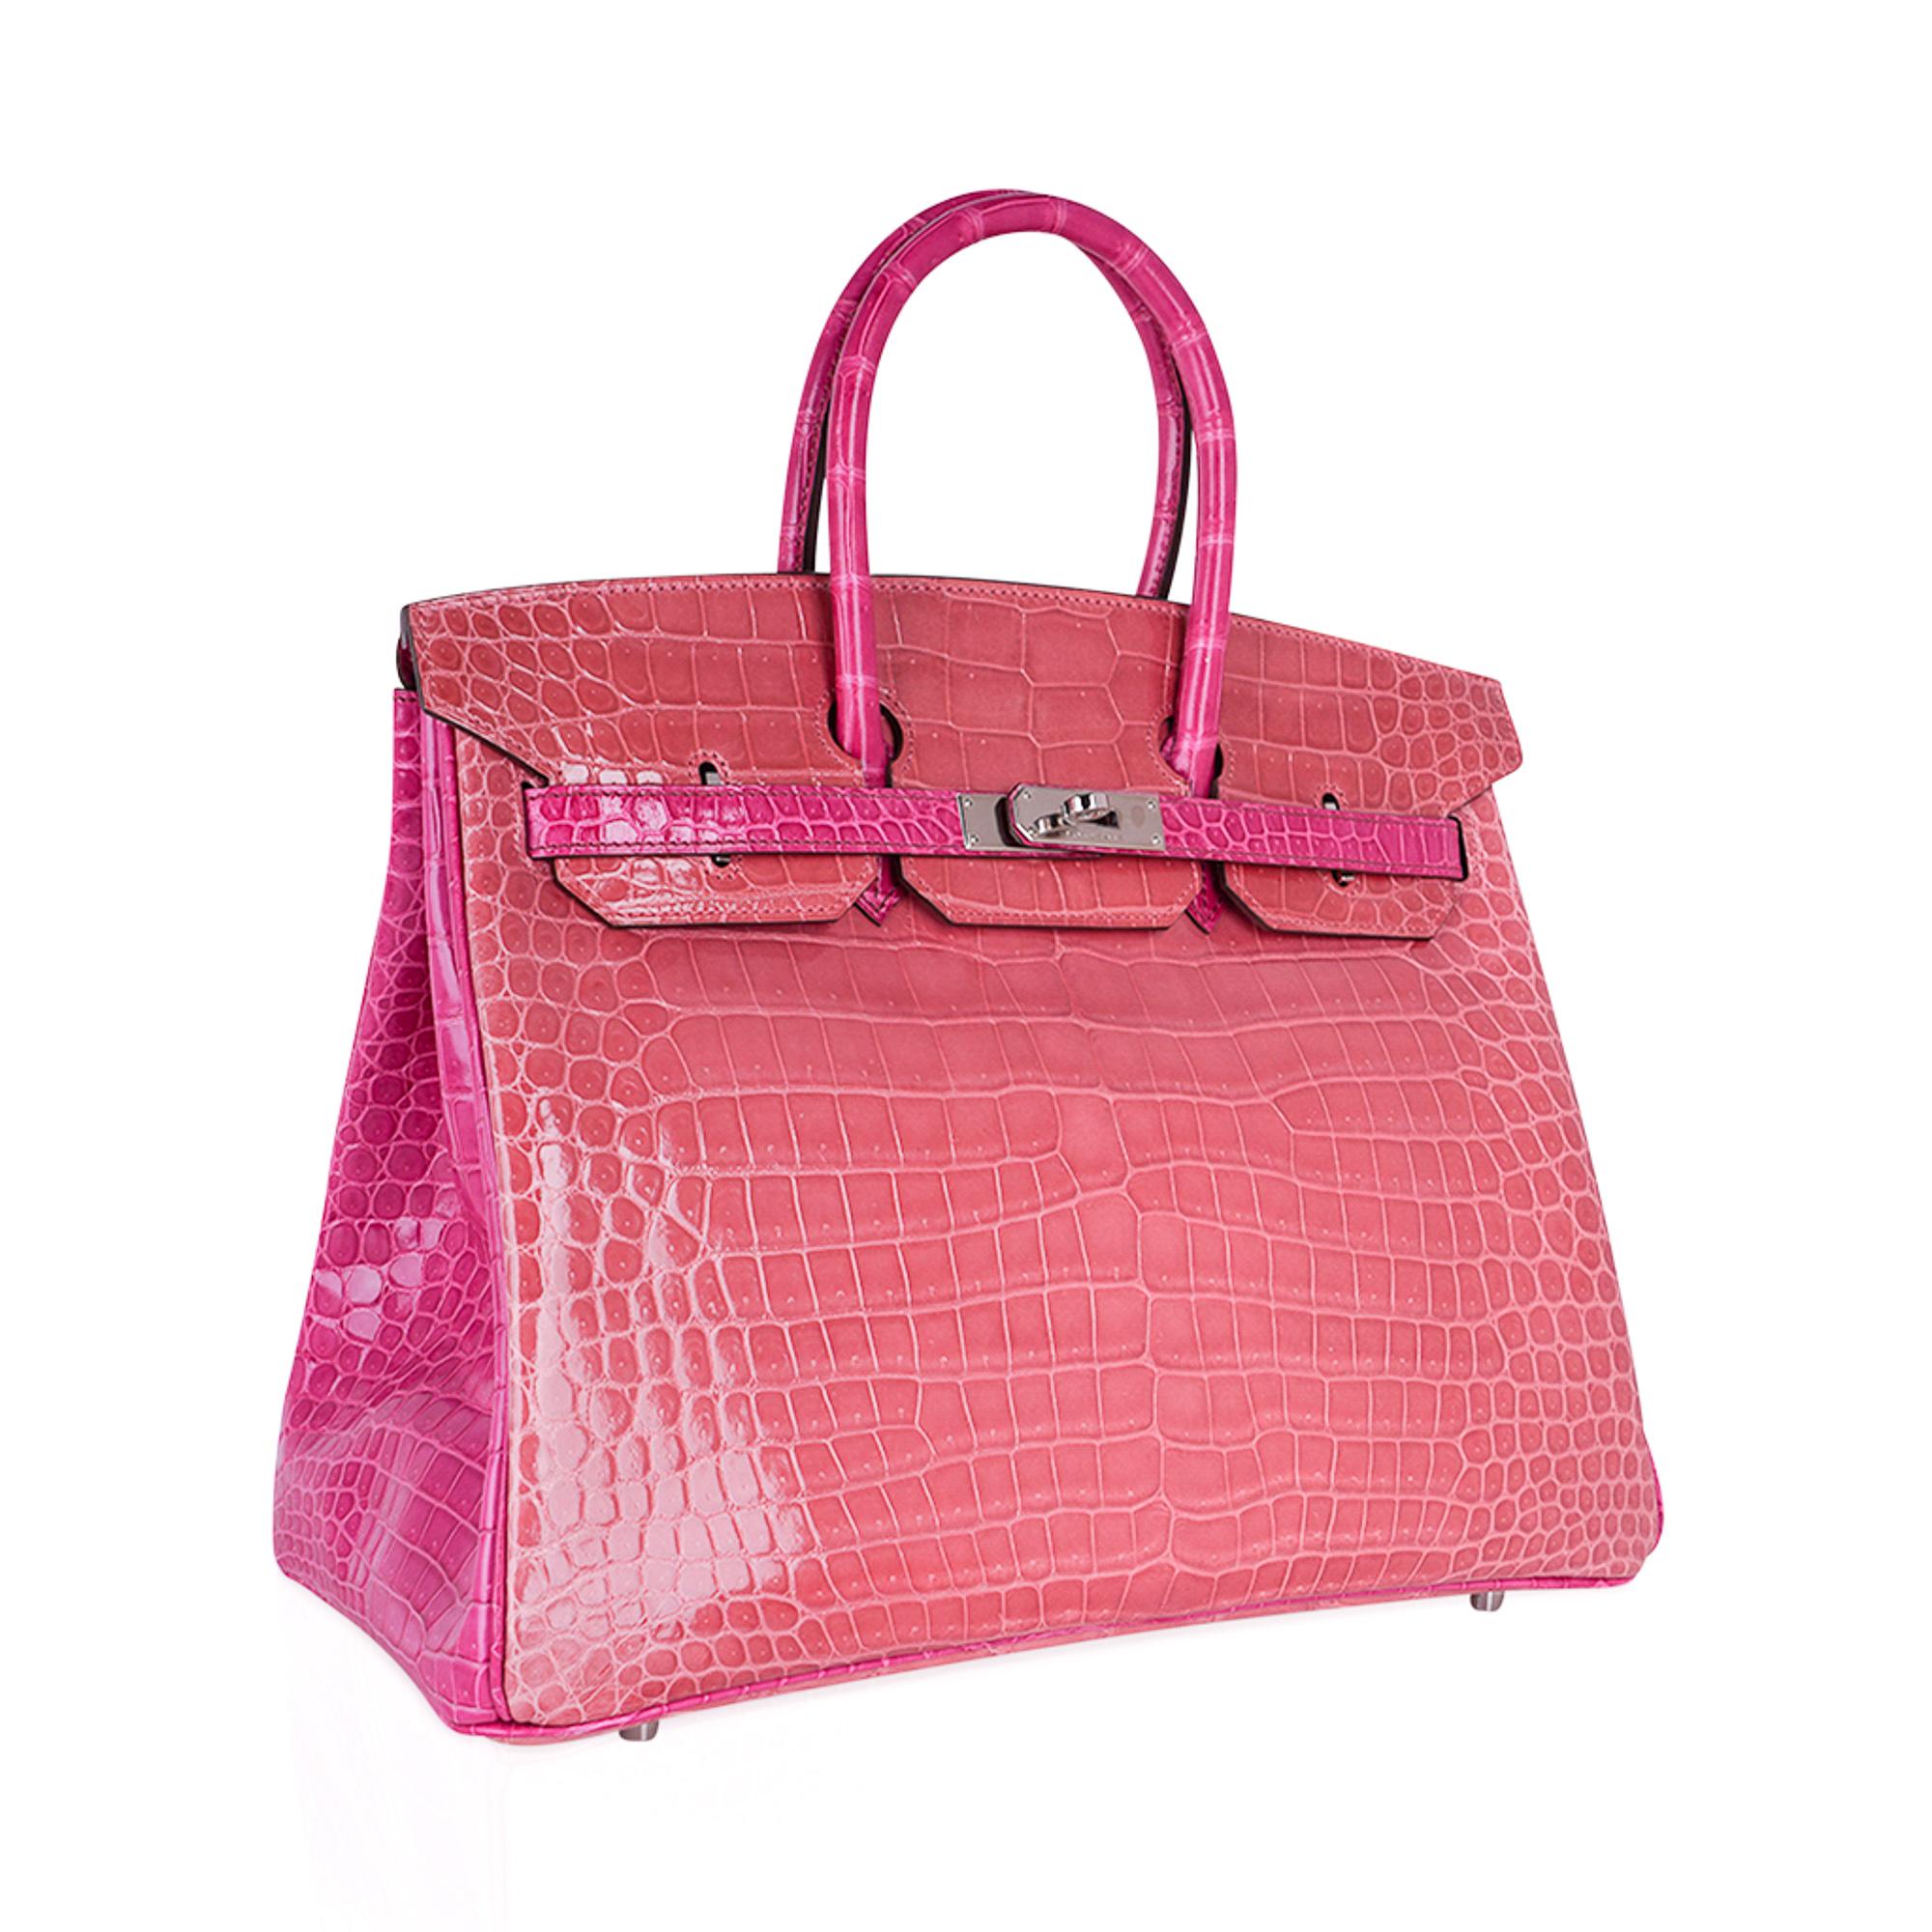 Mightychic offers an Hermes Birkin HSS 35 bag featured in exquisite unicorn rare Rose Indien and Fuschia Porosus Crocodile.
Utterly extraordinary, this beautiful rare bag is a superb find.
Rose Indien is one of the most rare colours produced by